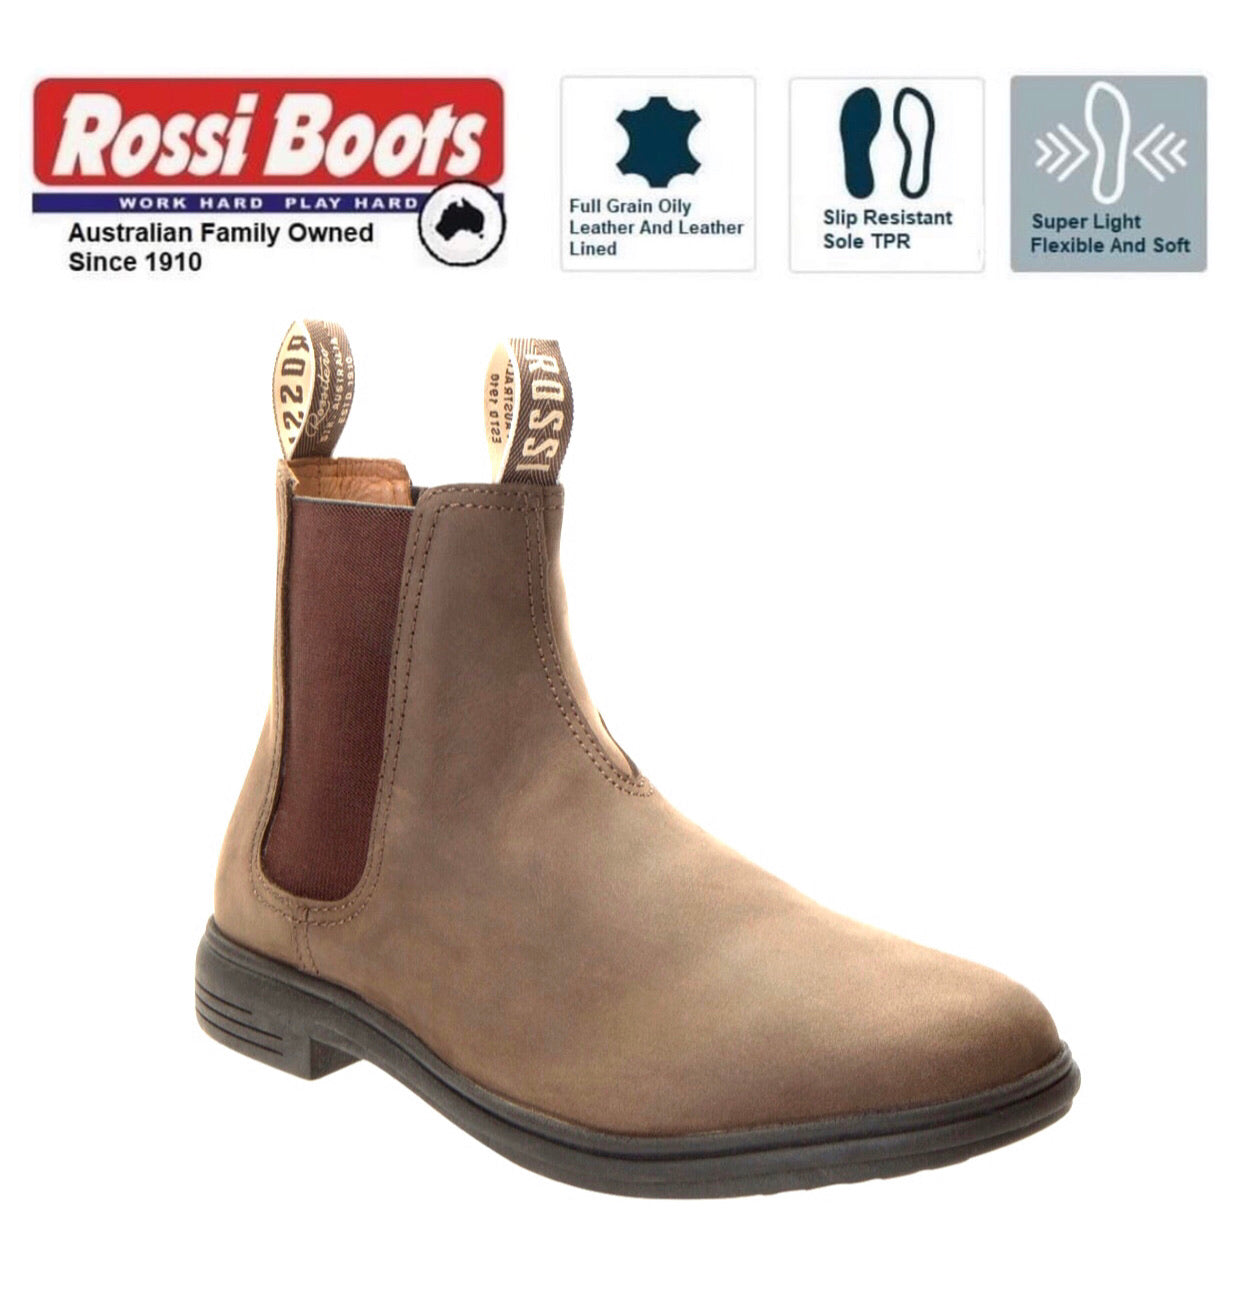 Rossi Boots 141 Barossa Oily Brown Leather Chelsea Dress Boot